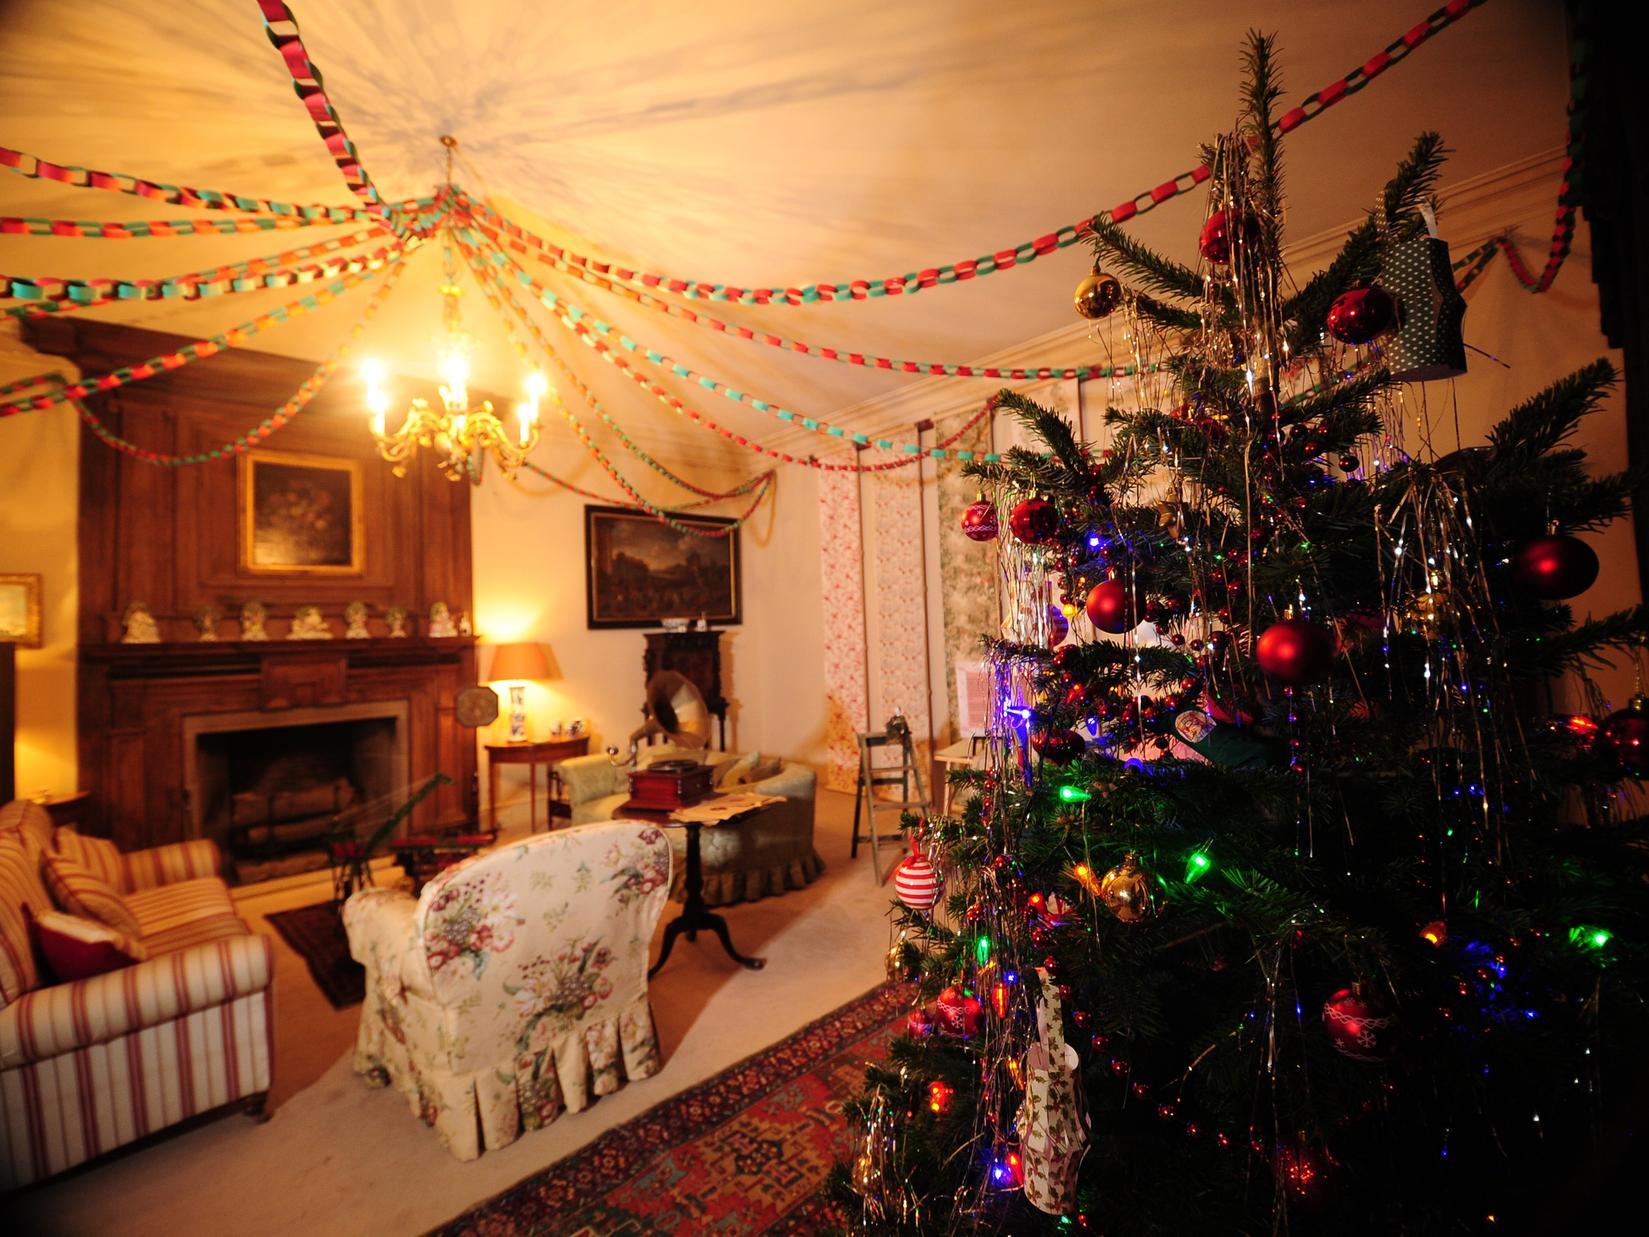 Discover Nunnington hall as it would have been at Christmas time throughout history. Available until December 15.